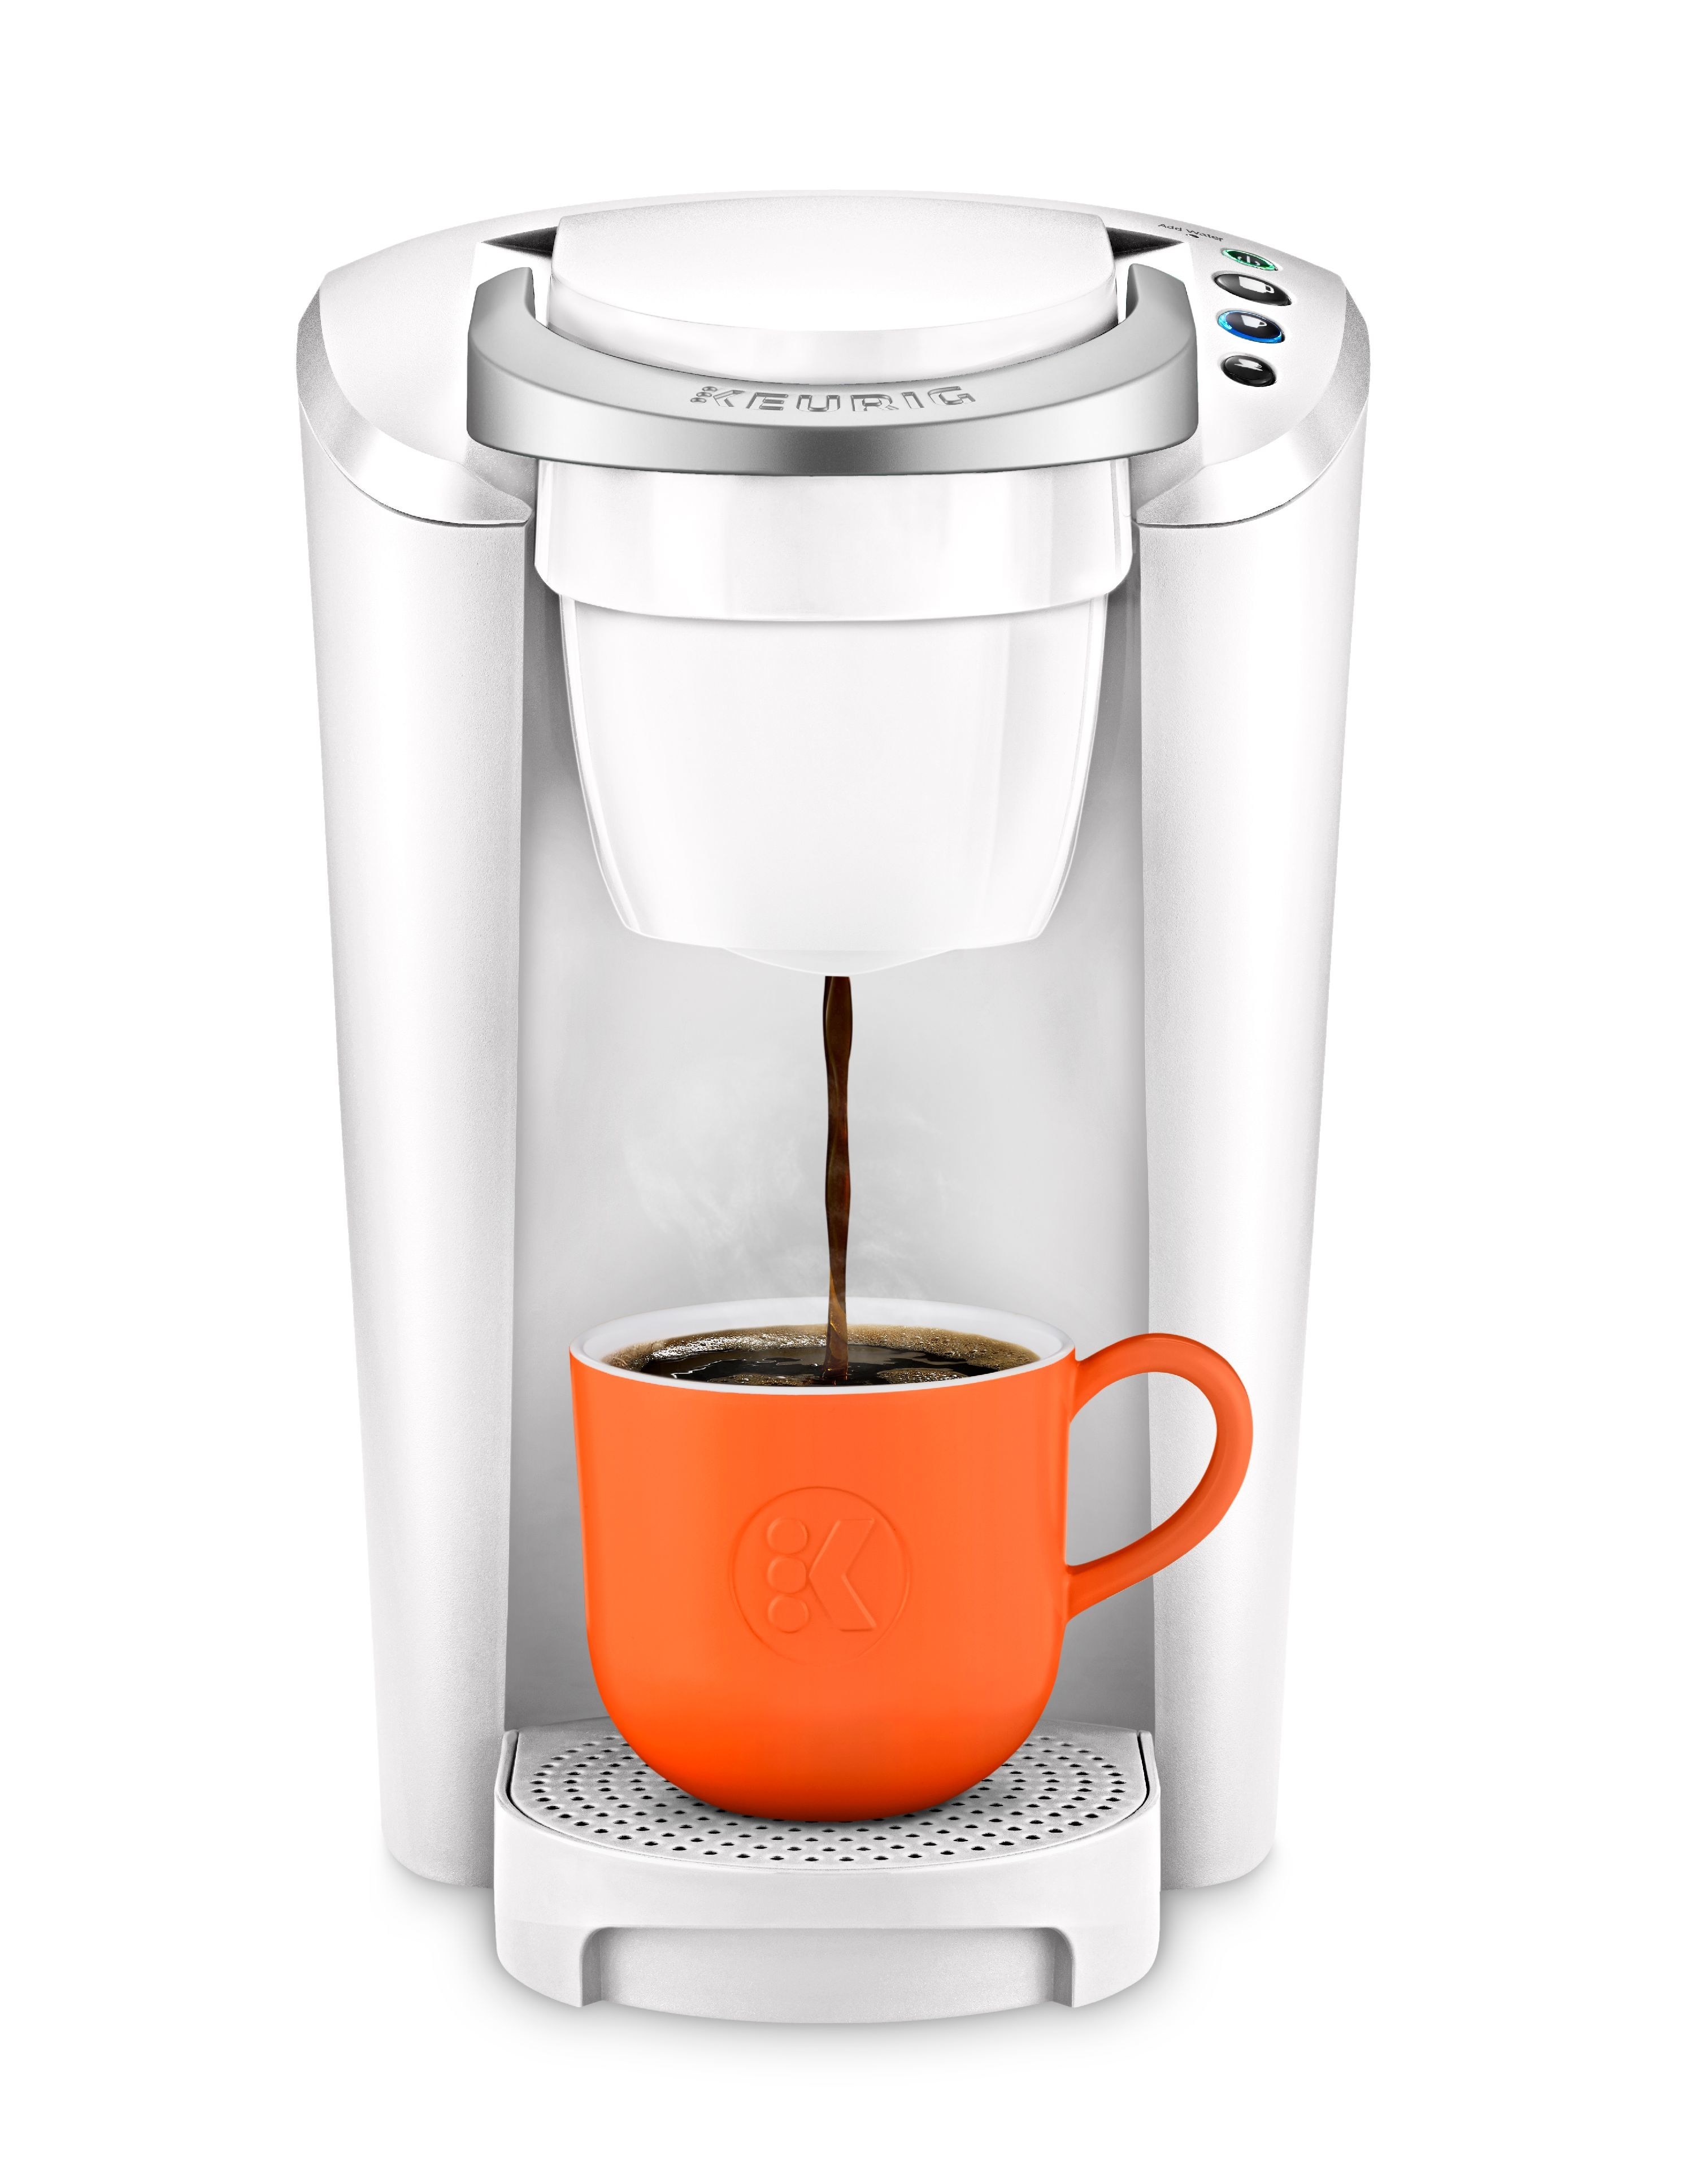 The coffee maker in white, with an orange cup in it, dispensing coffee